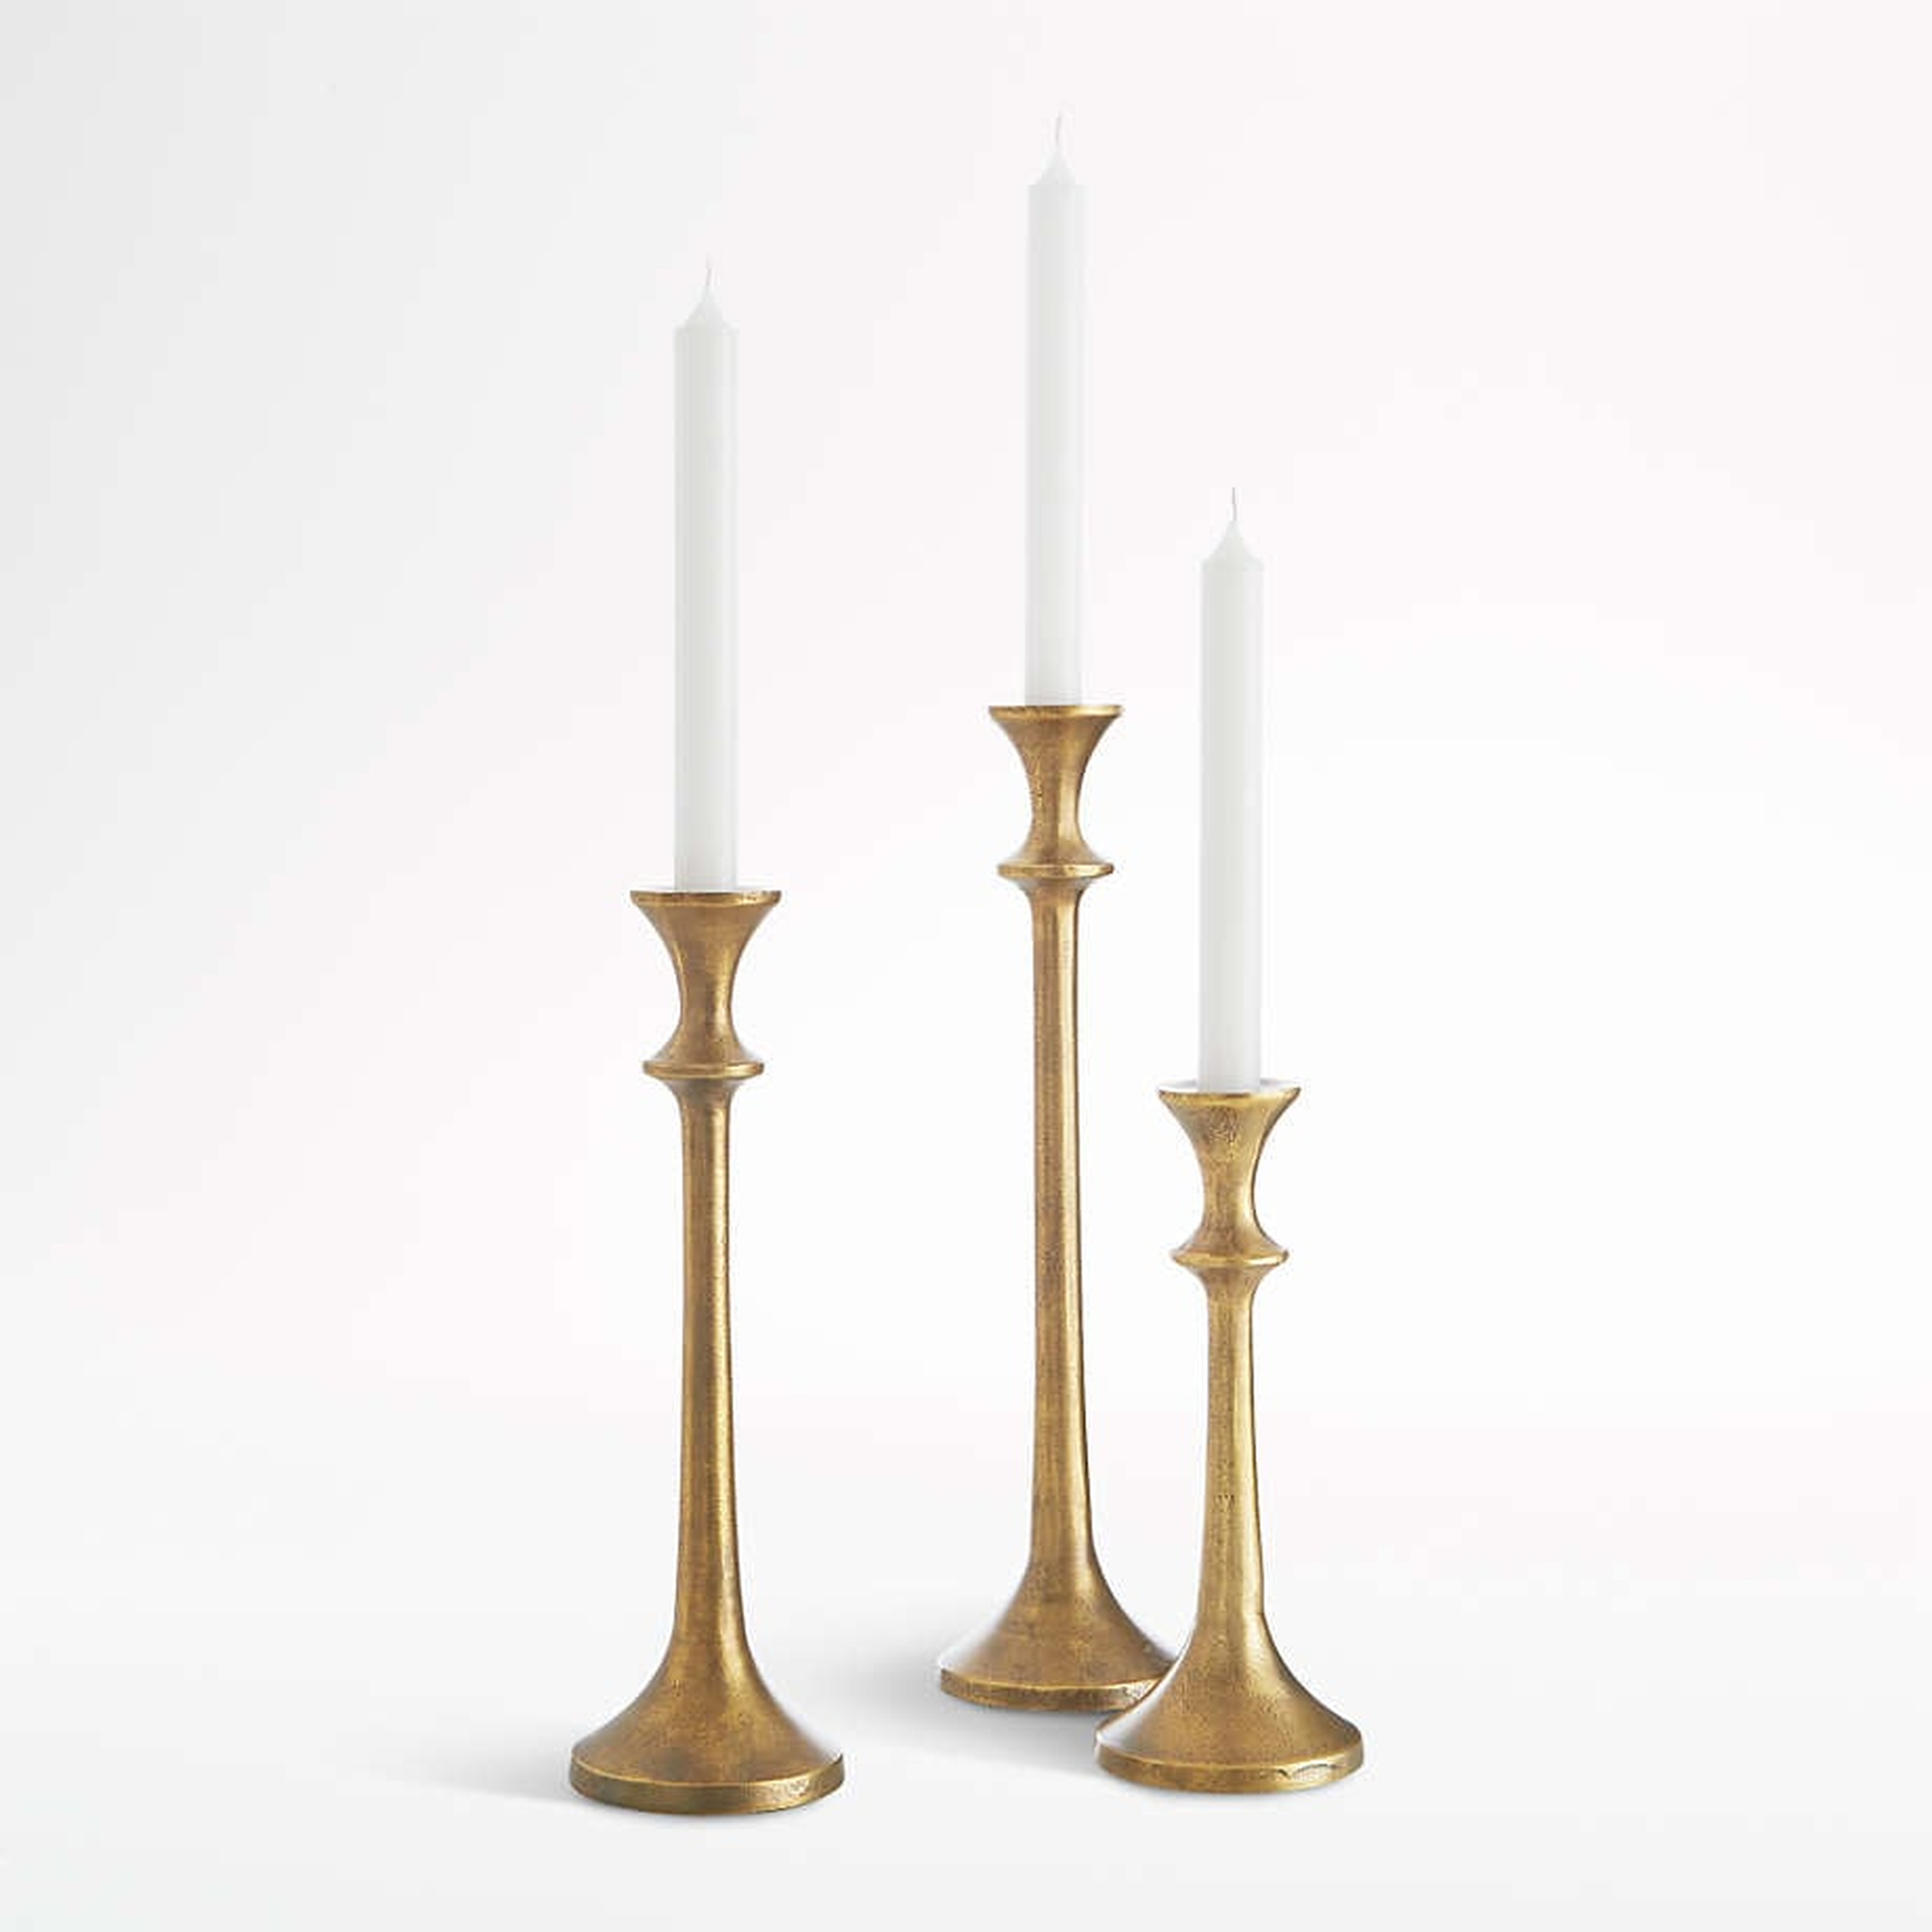 Emmett Antique Brass Taper Candle Holders, Set of 3 - Crate and Barrel